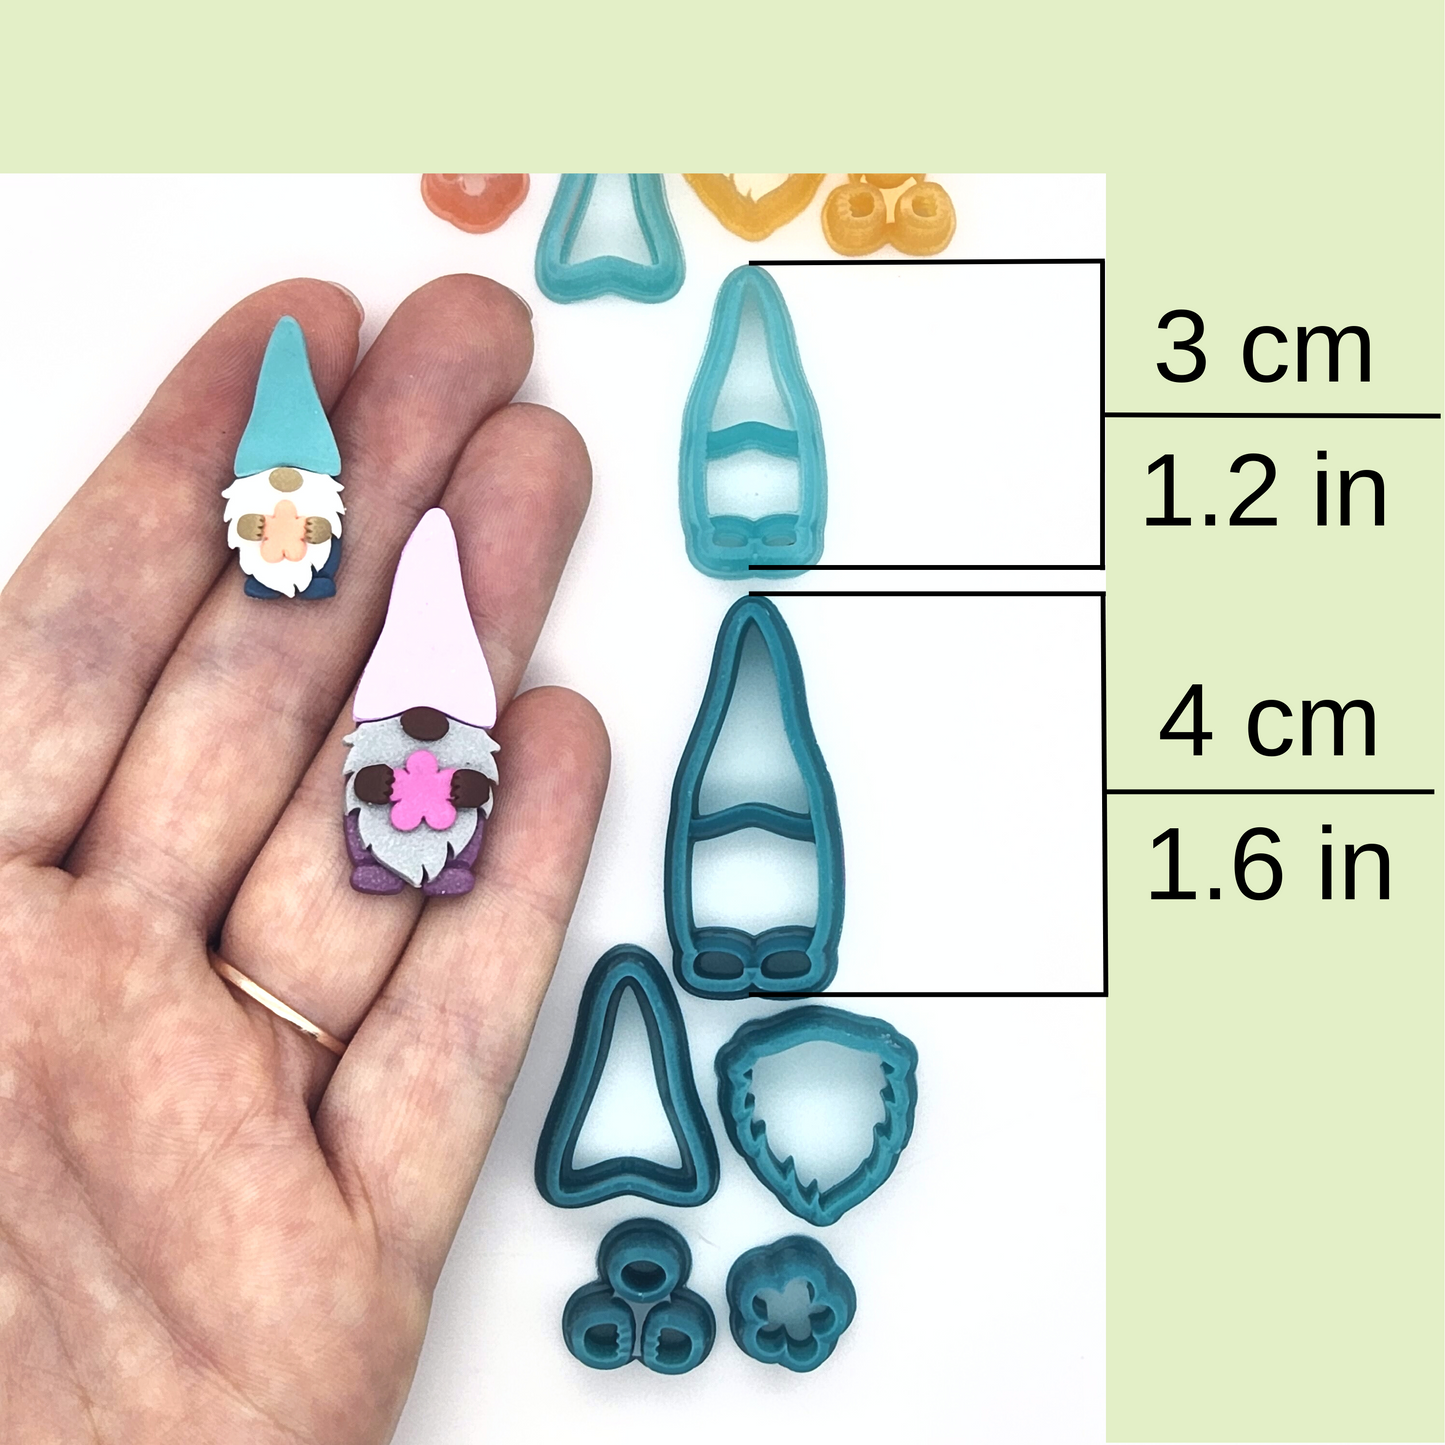 Garden Gnome Polymer Clay Cutter Set available sizes, 3 cm / 1.2 inch, and 4 cm / 1.6 inch, alongside their sample finish product